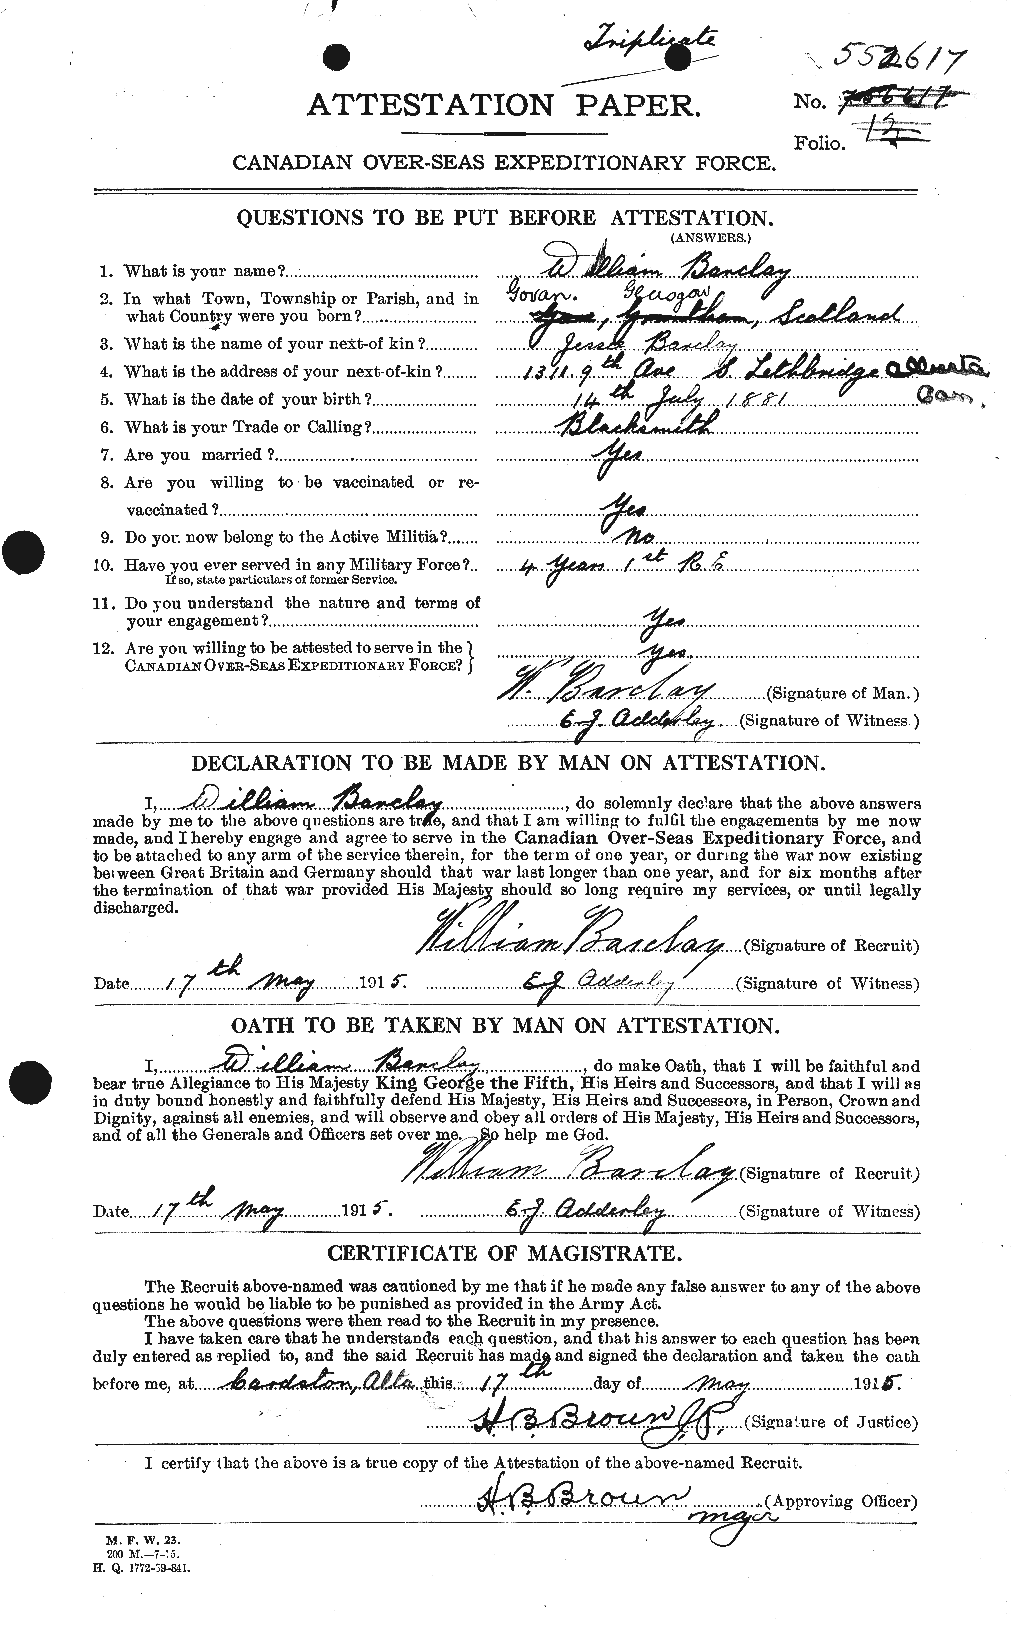 Personnel Records of the First World War - CEF 220853a